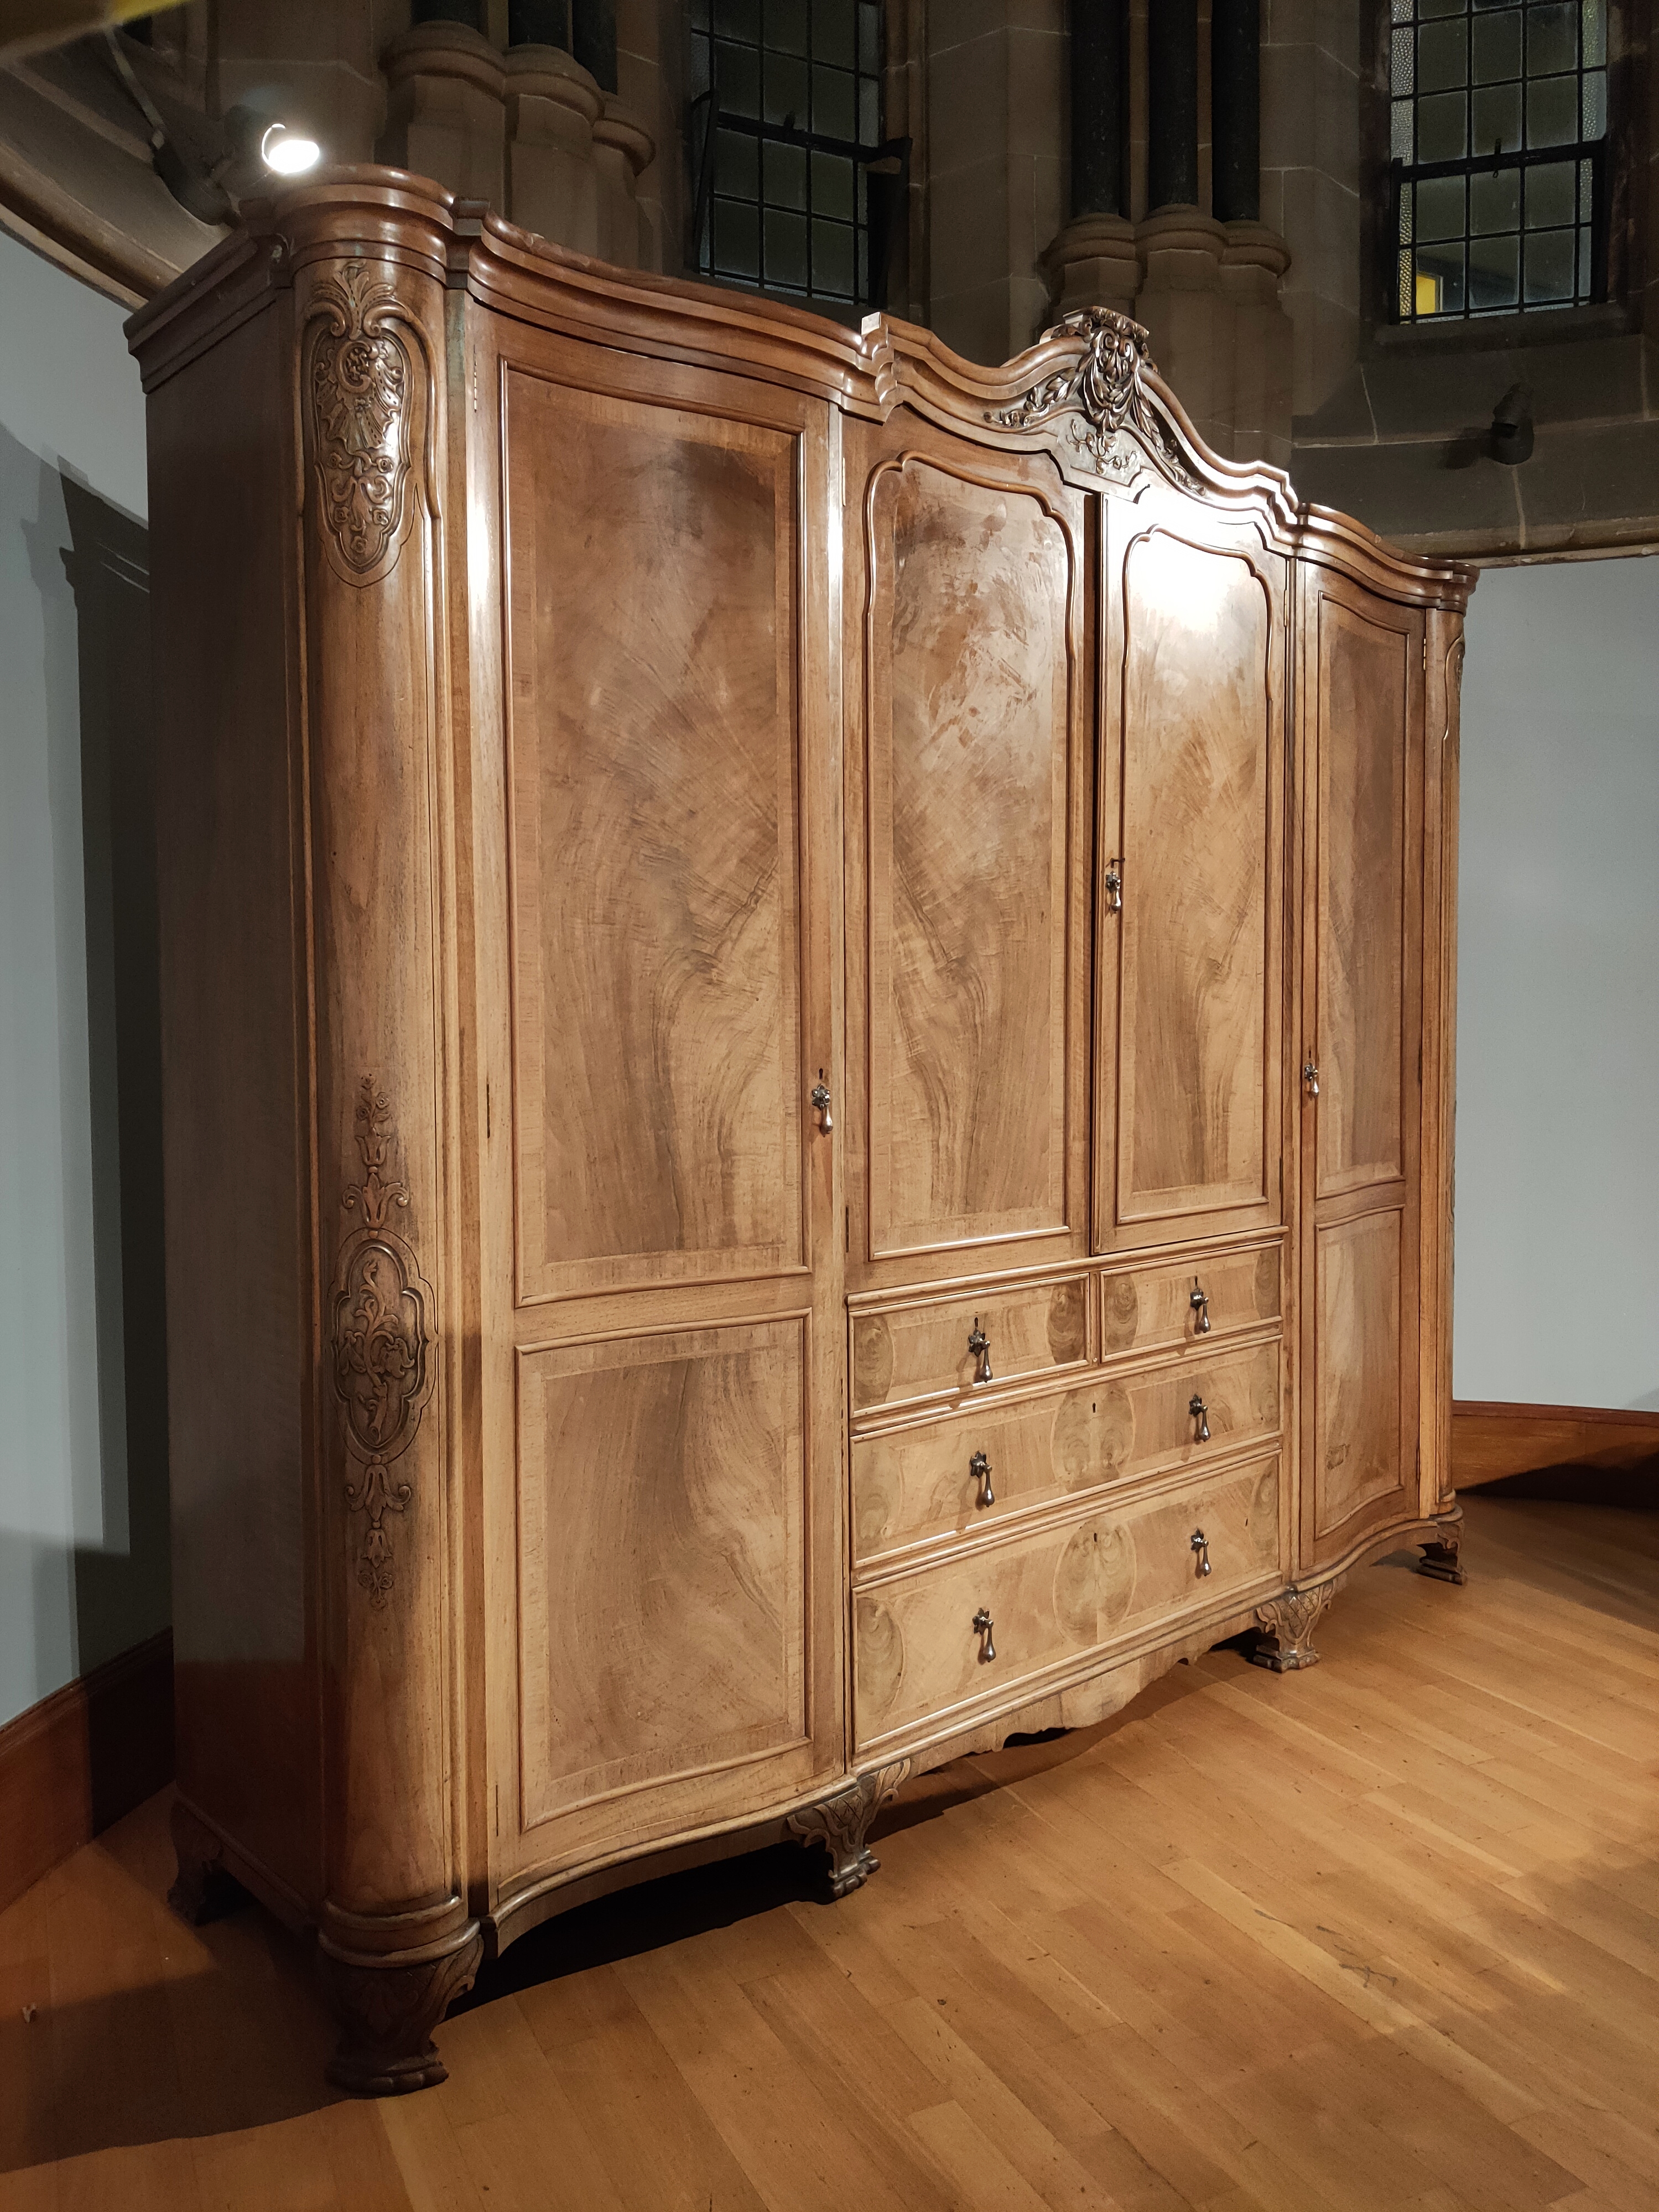 Whytock & Reid Walnut Wardrobe - built for Coco Chanel in Rosehall 1926 - Image 3 of 14